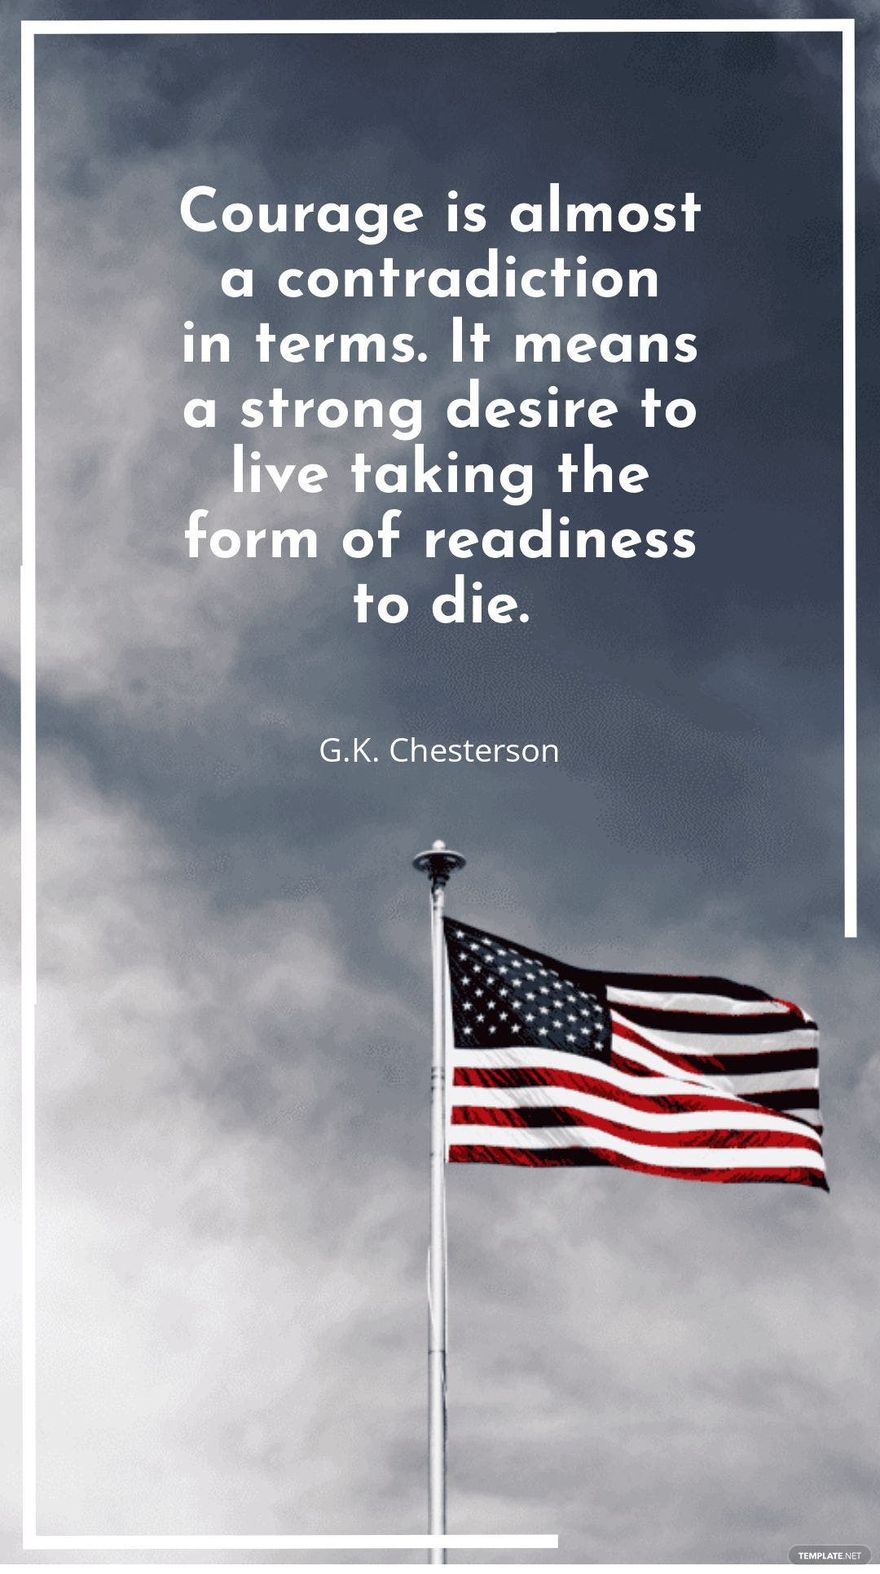 Free G.K. Chesterson - "Courage is almost a contradiction in terms. It means a strong desire to live taking the form of readiness to die.” in JPG